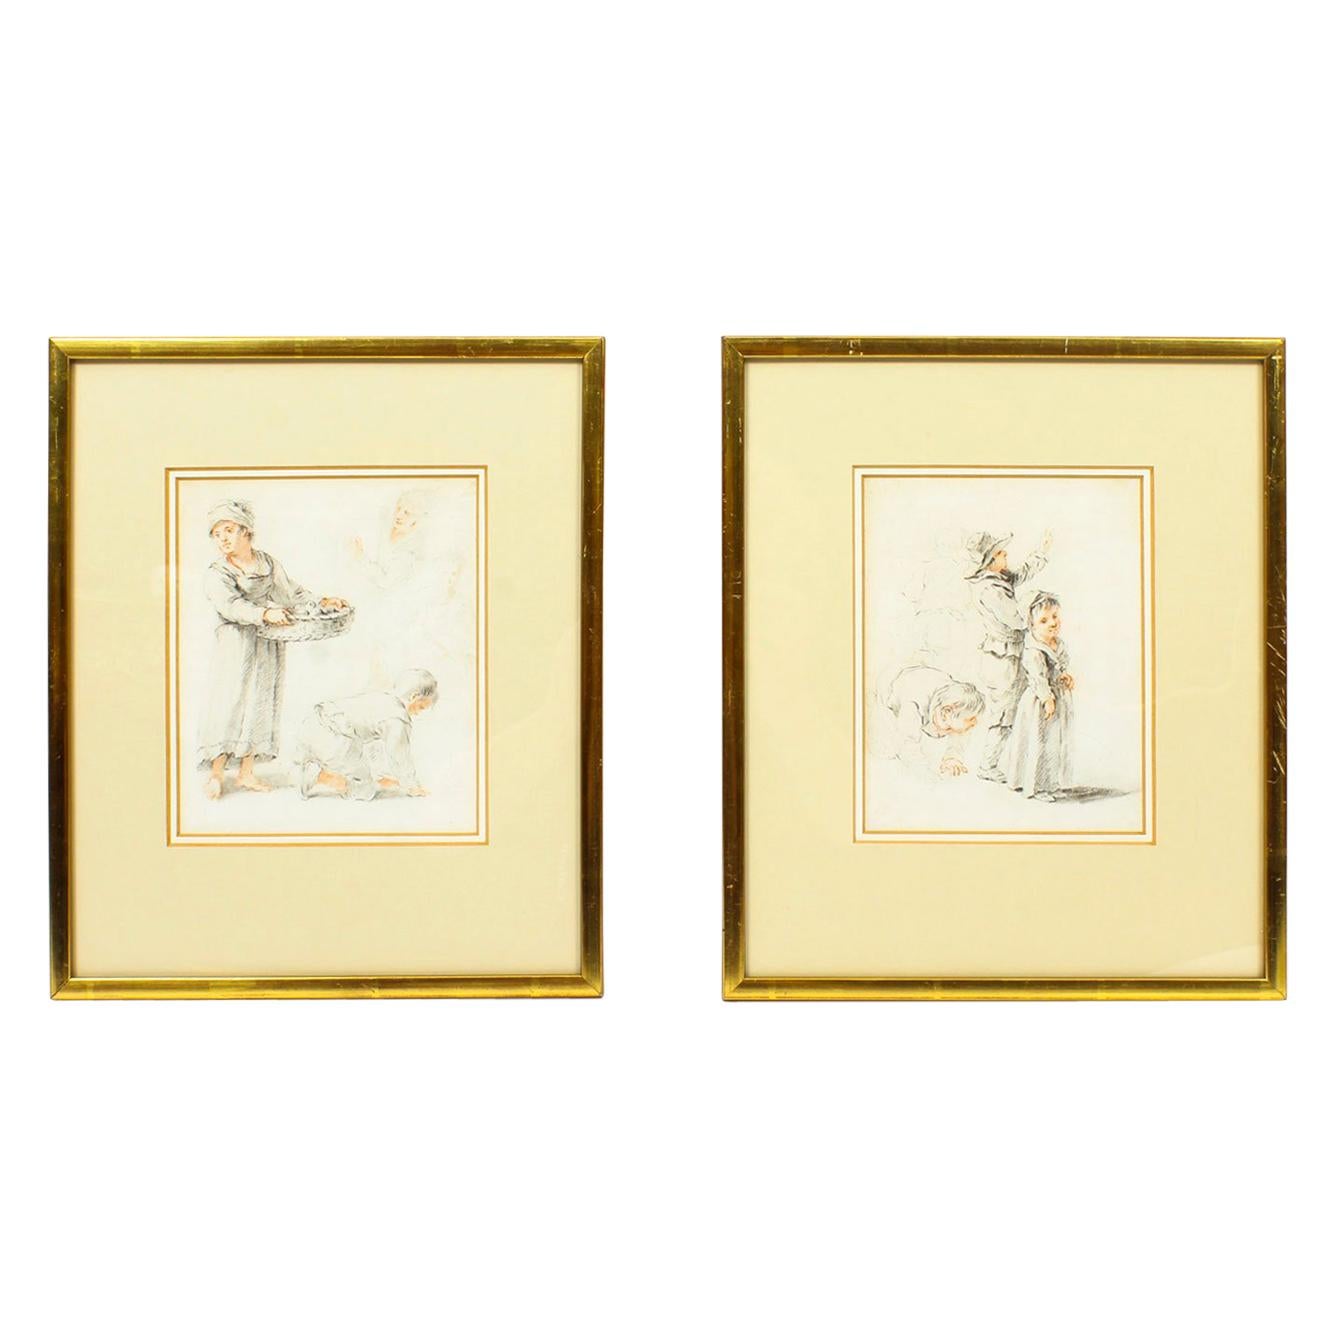 Antique Pair of Sketches by Thomas Barker of Bath, 18th Century